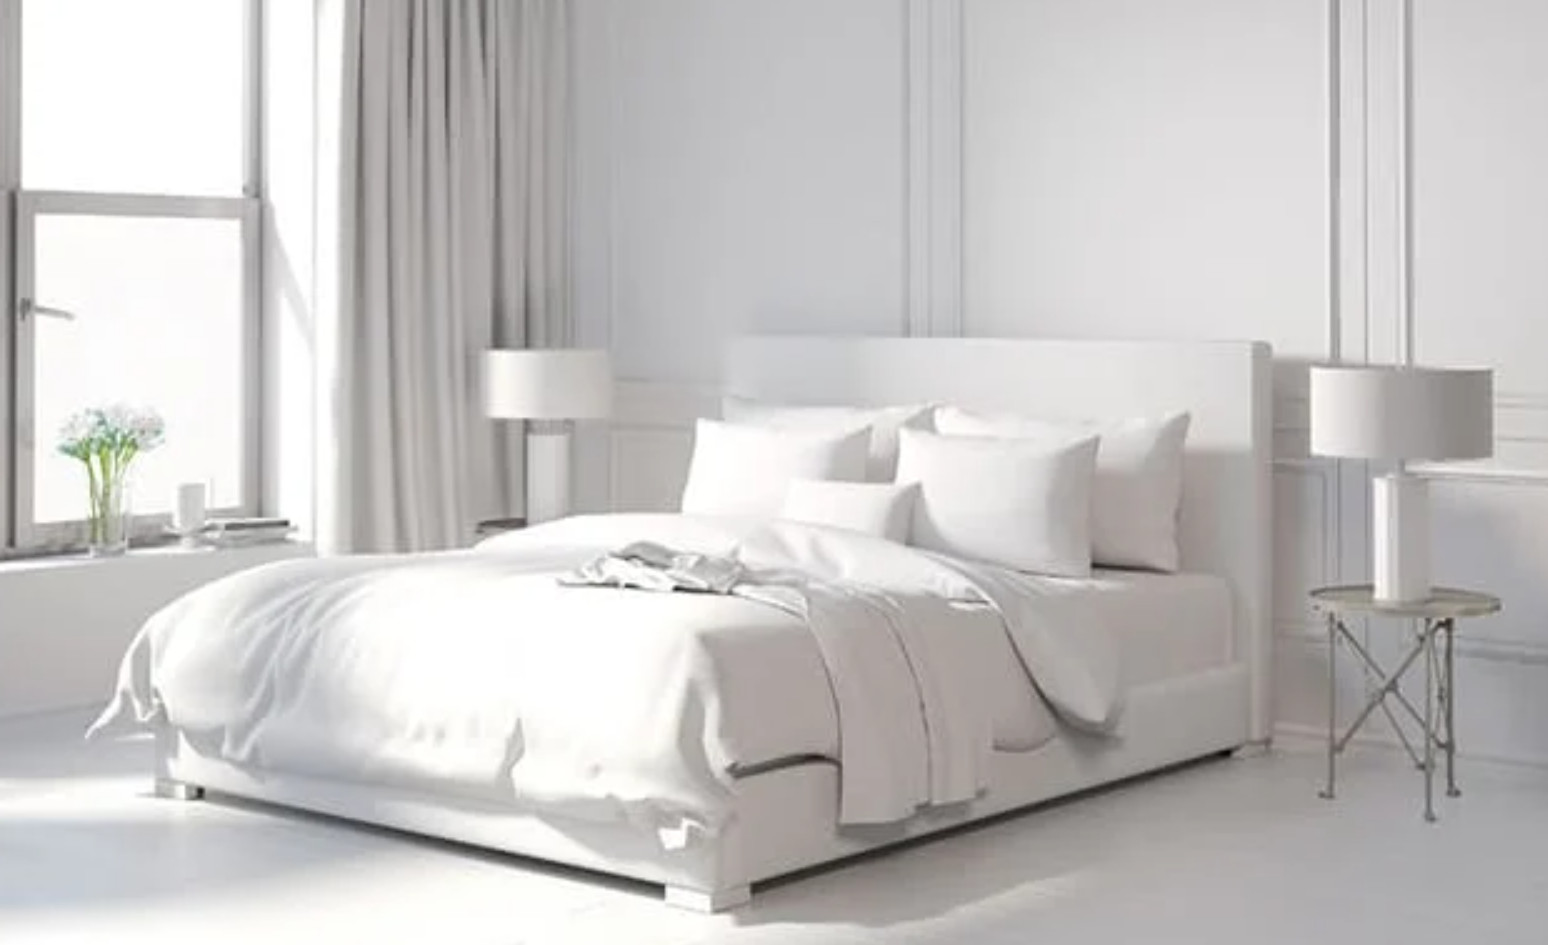 worst bedroom colors for sleep white